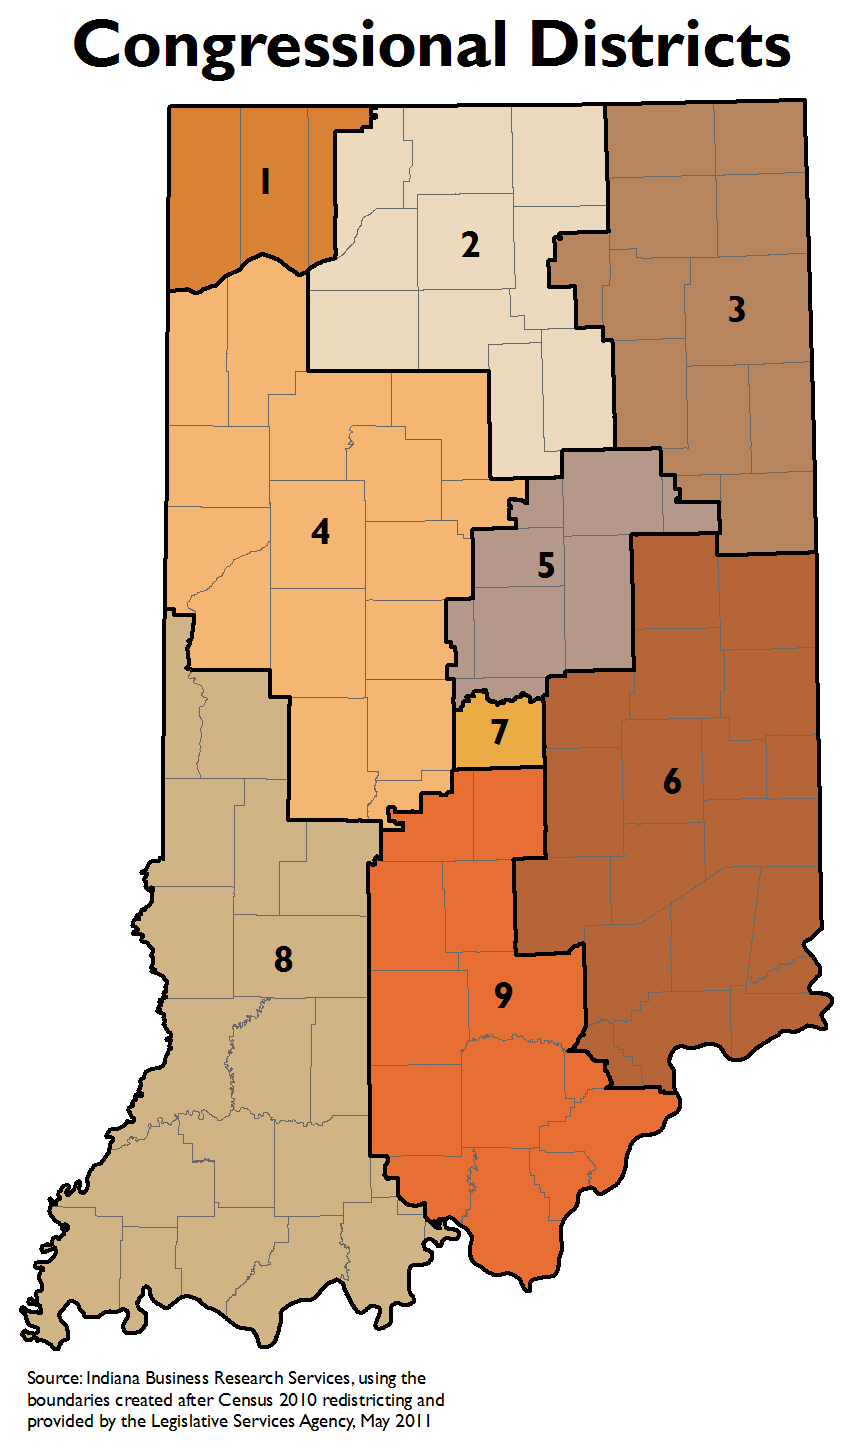 Indiana is one of the least gerrymandered congressional districts in the country